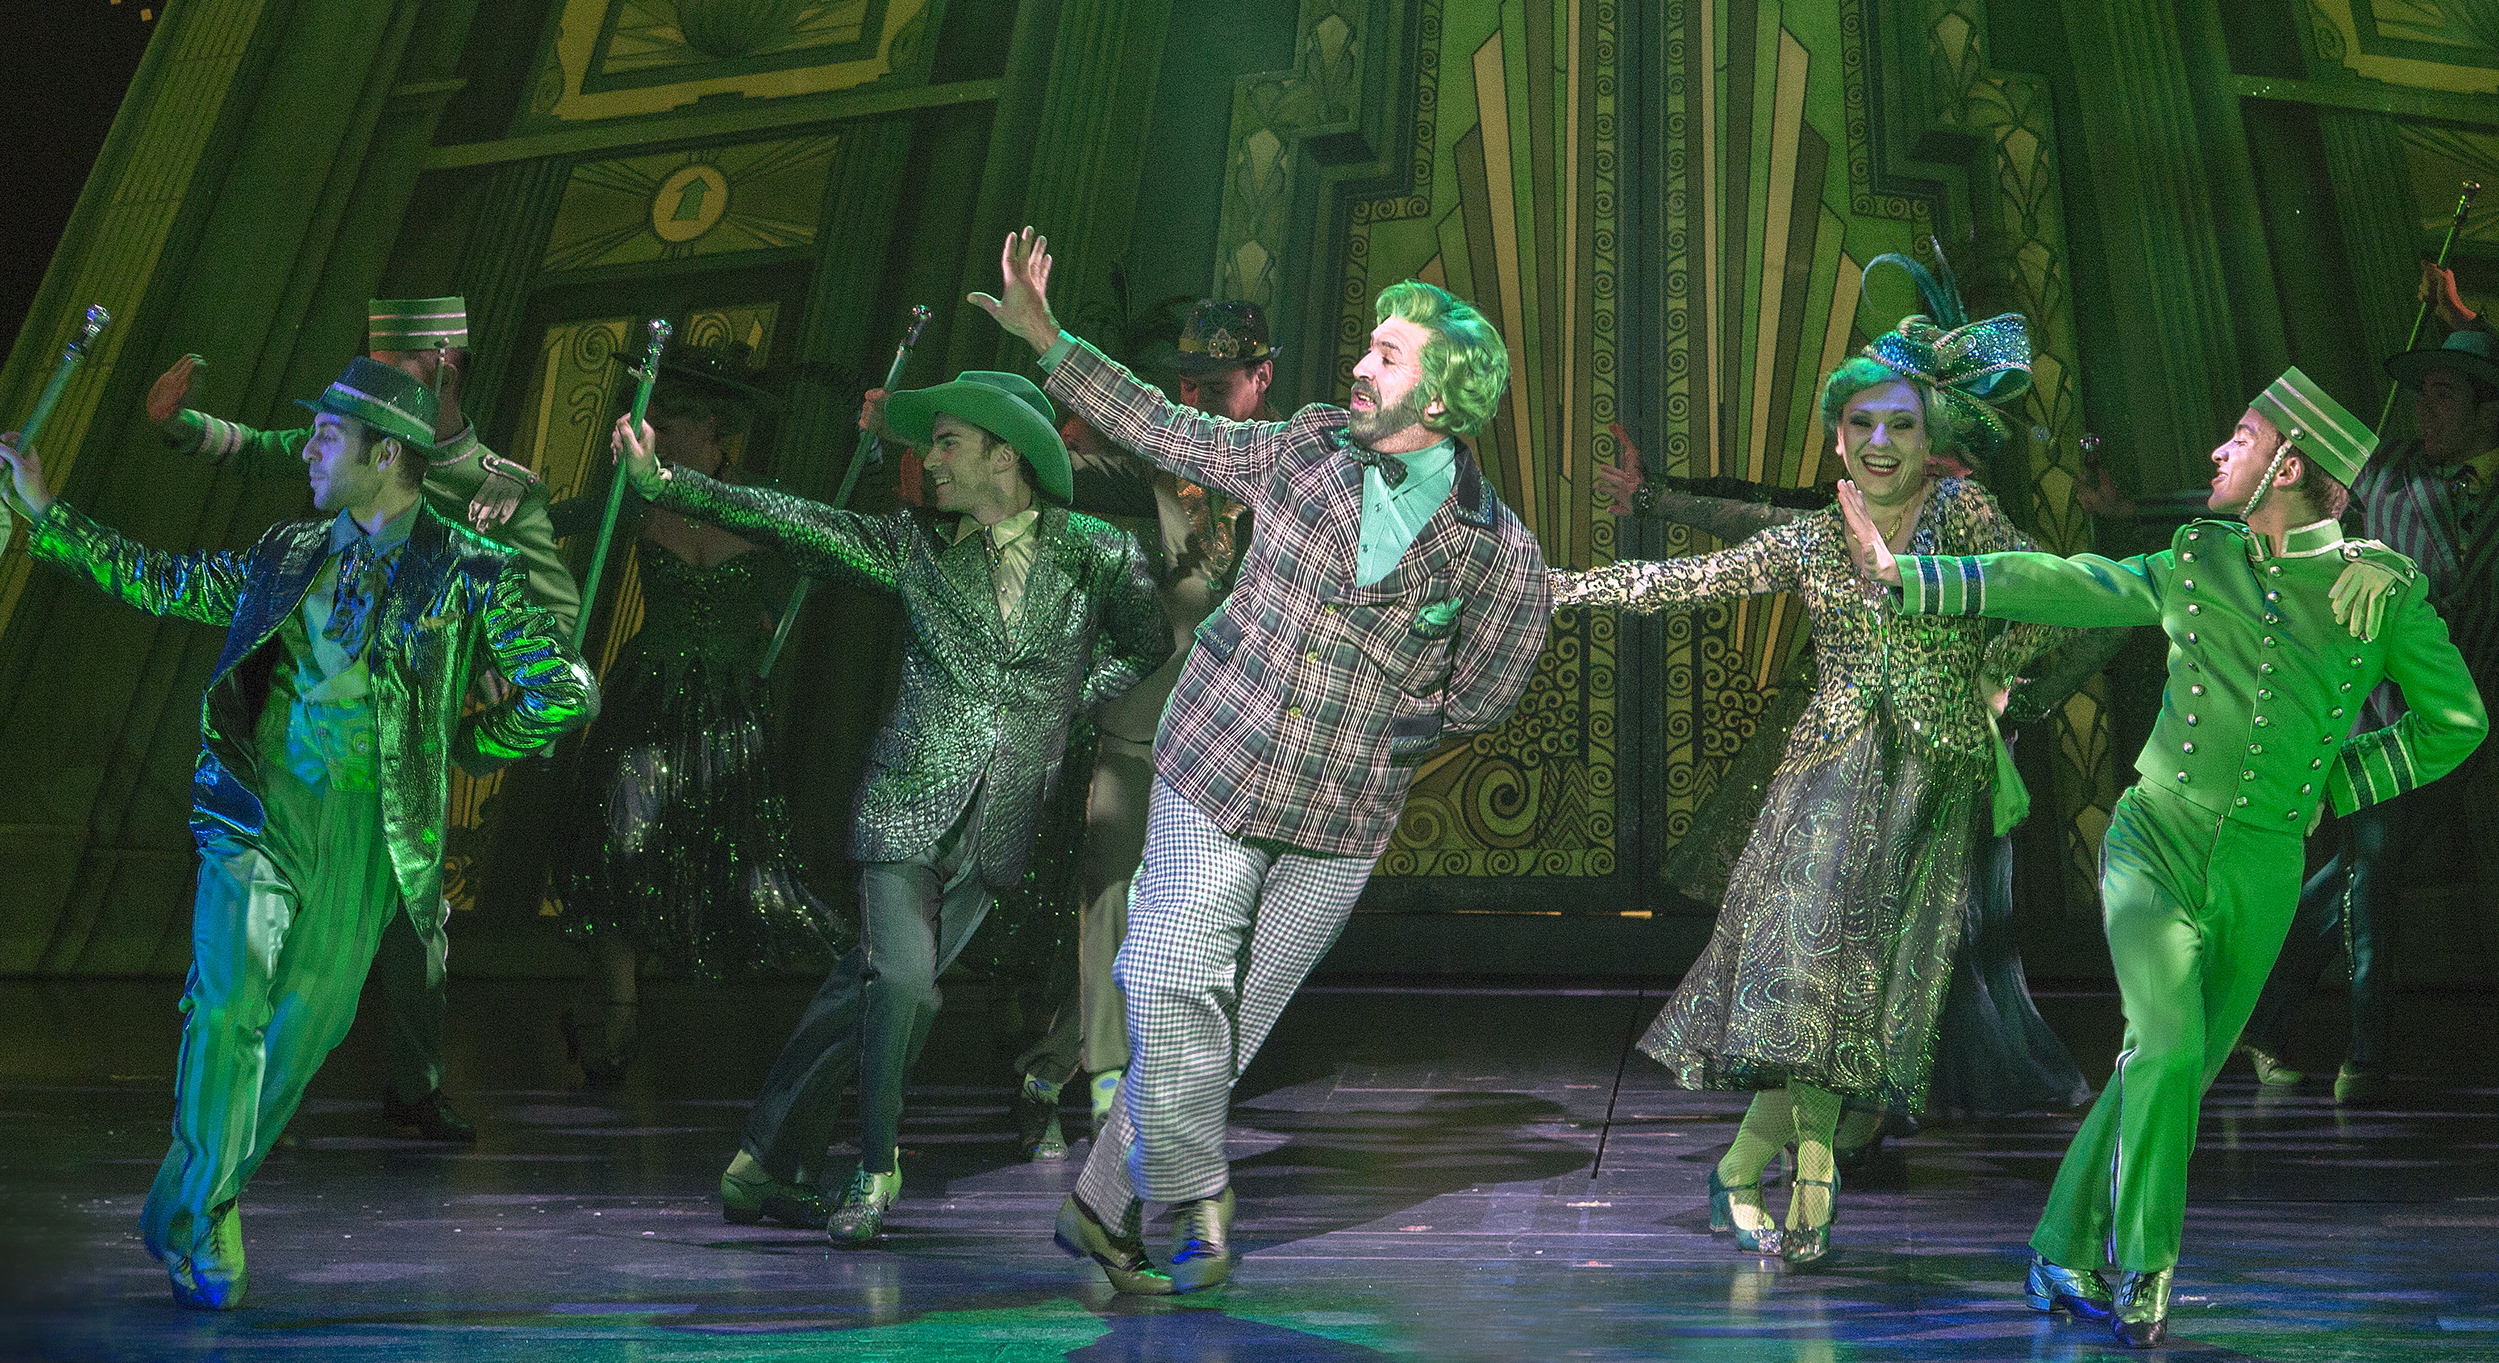 It's all green light in Emerald City when the remake of "The Wizard of Oz" visits the Steel City. And should you want wizardry newer than Oz, there's plenty of that scheduled for Pittsburgh stages too.